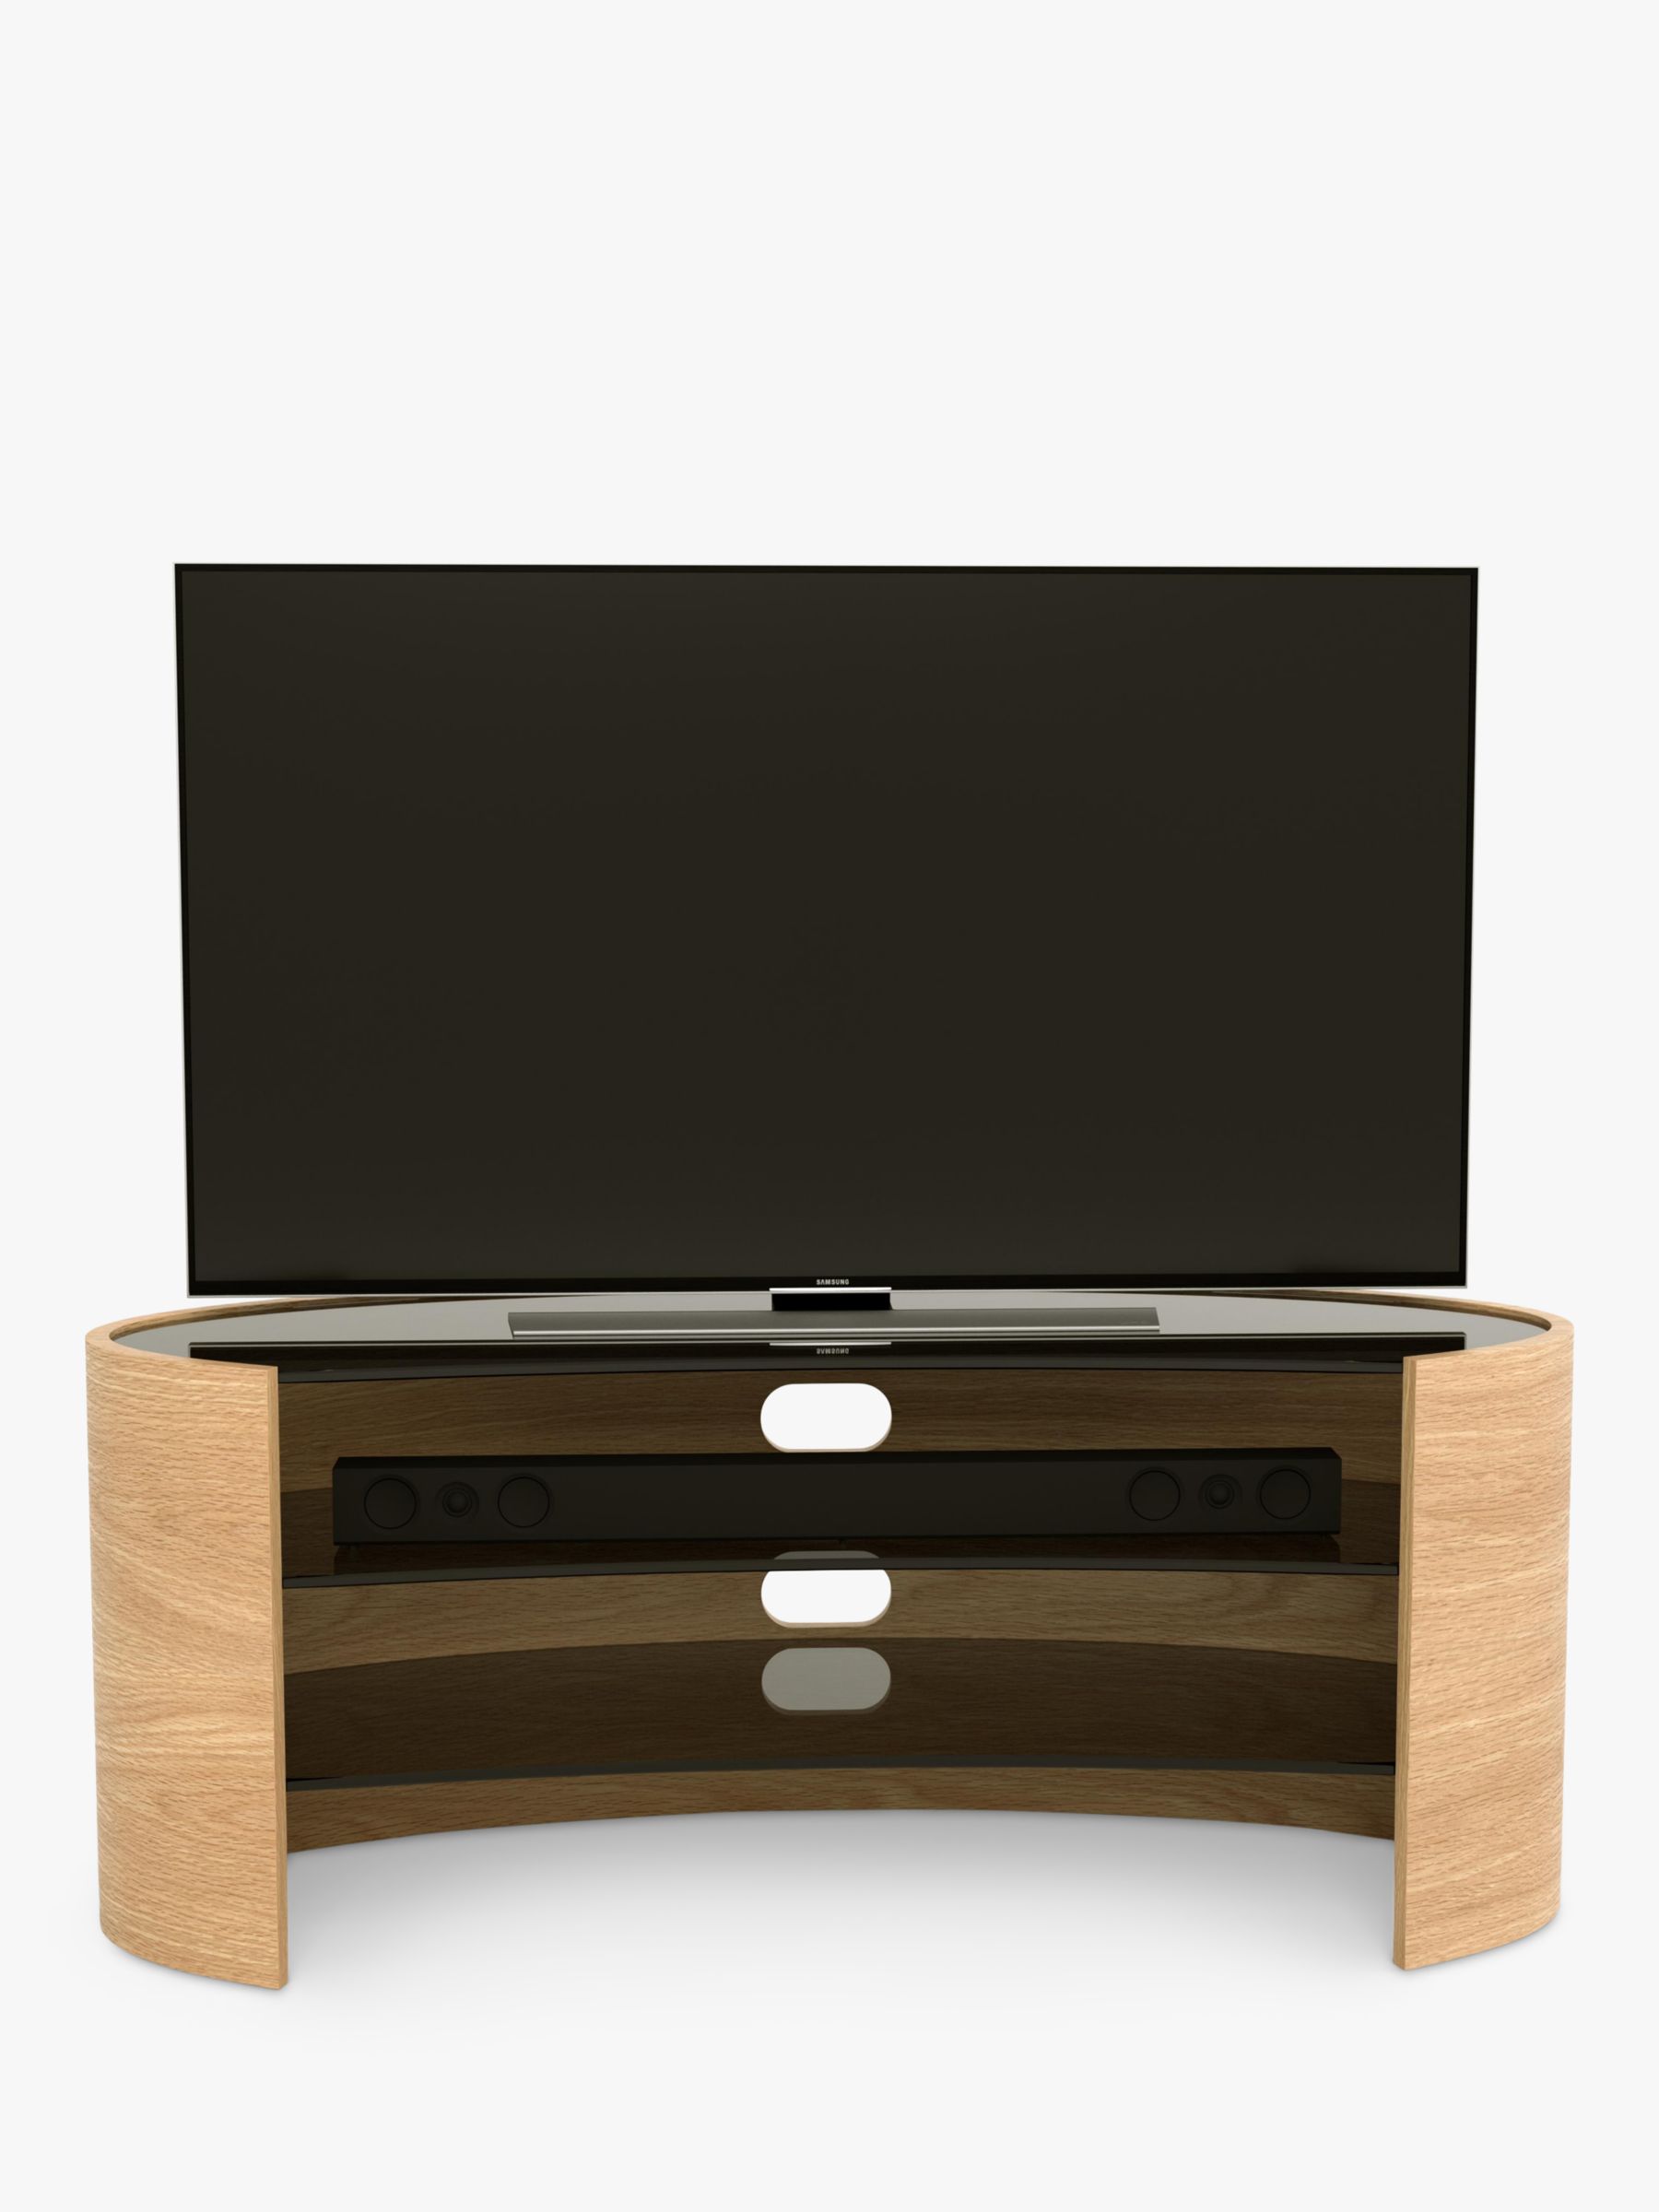 Photo of Tom schneider elliptical 1250 tv stand for tvs up to 55